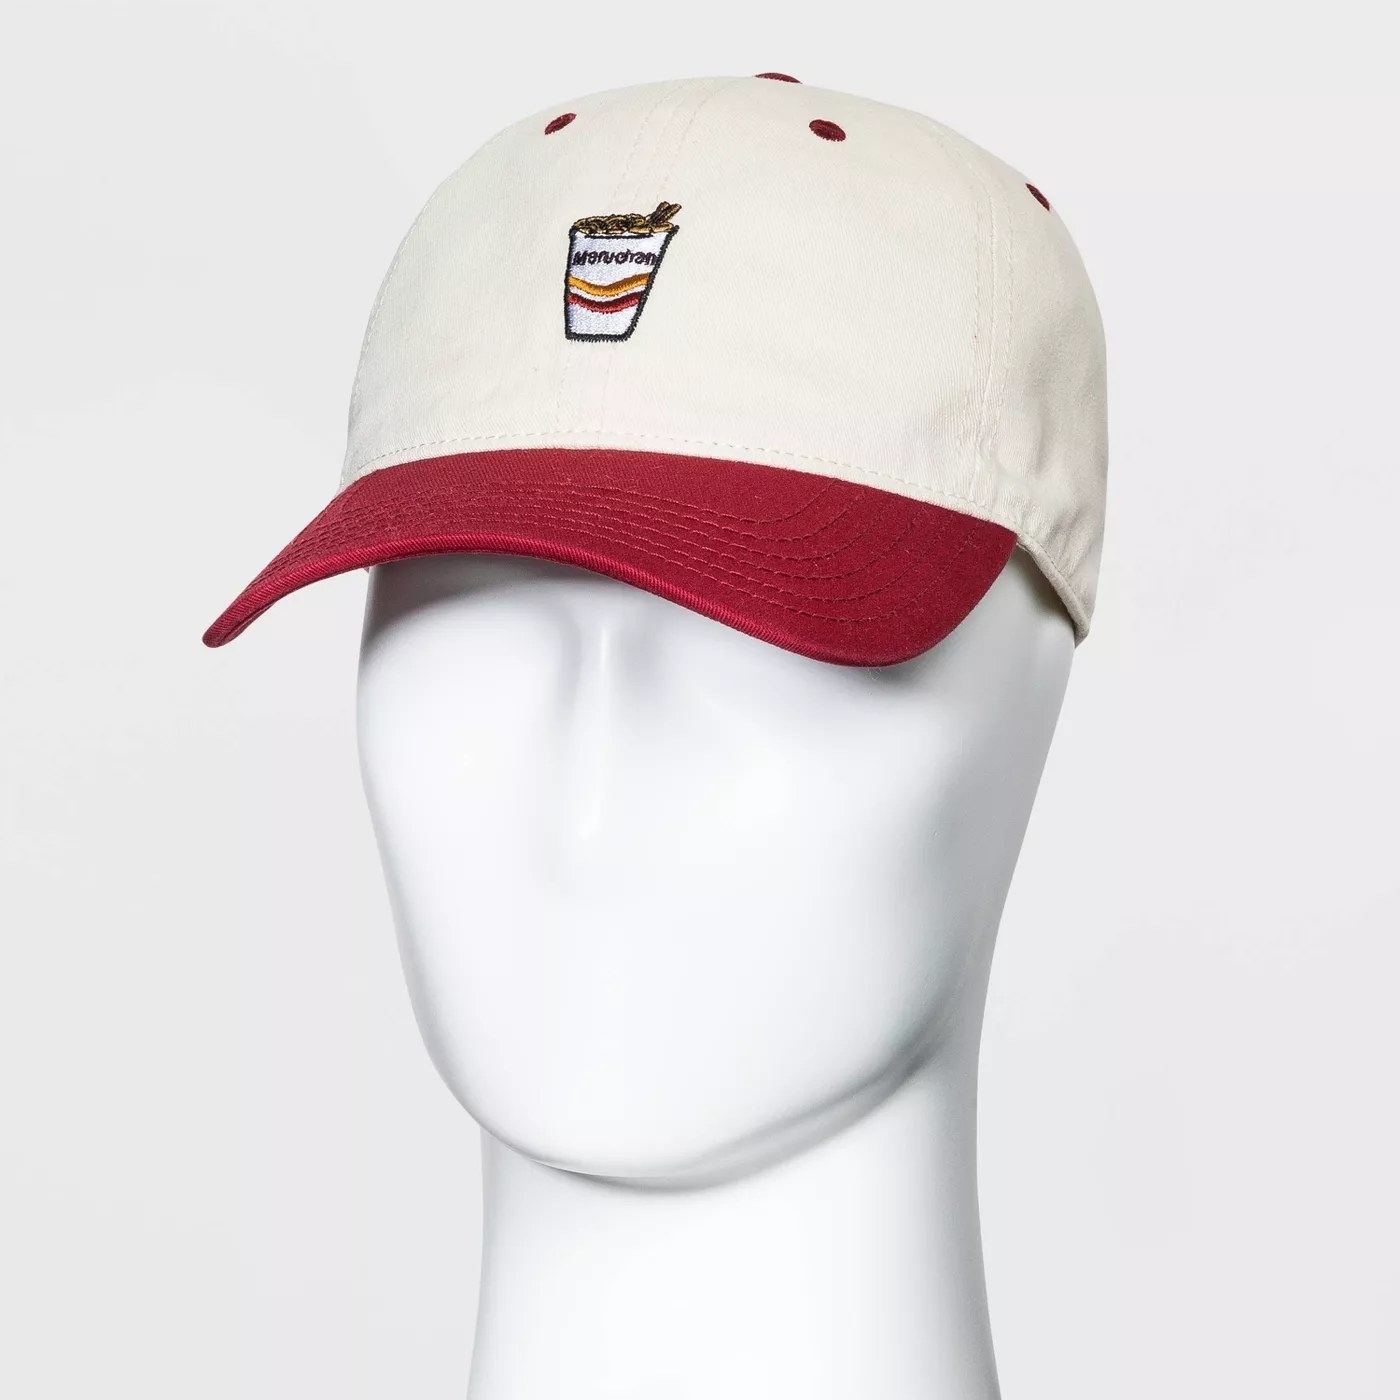 The beige and red cap with a ramen cup stitched onto it